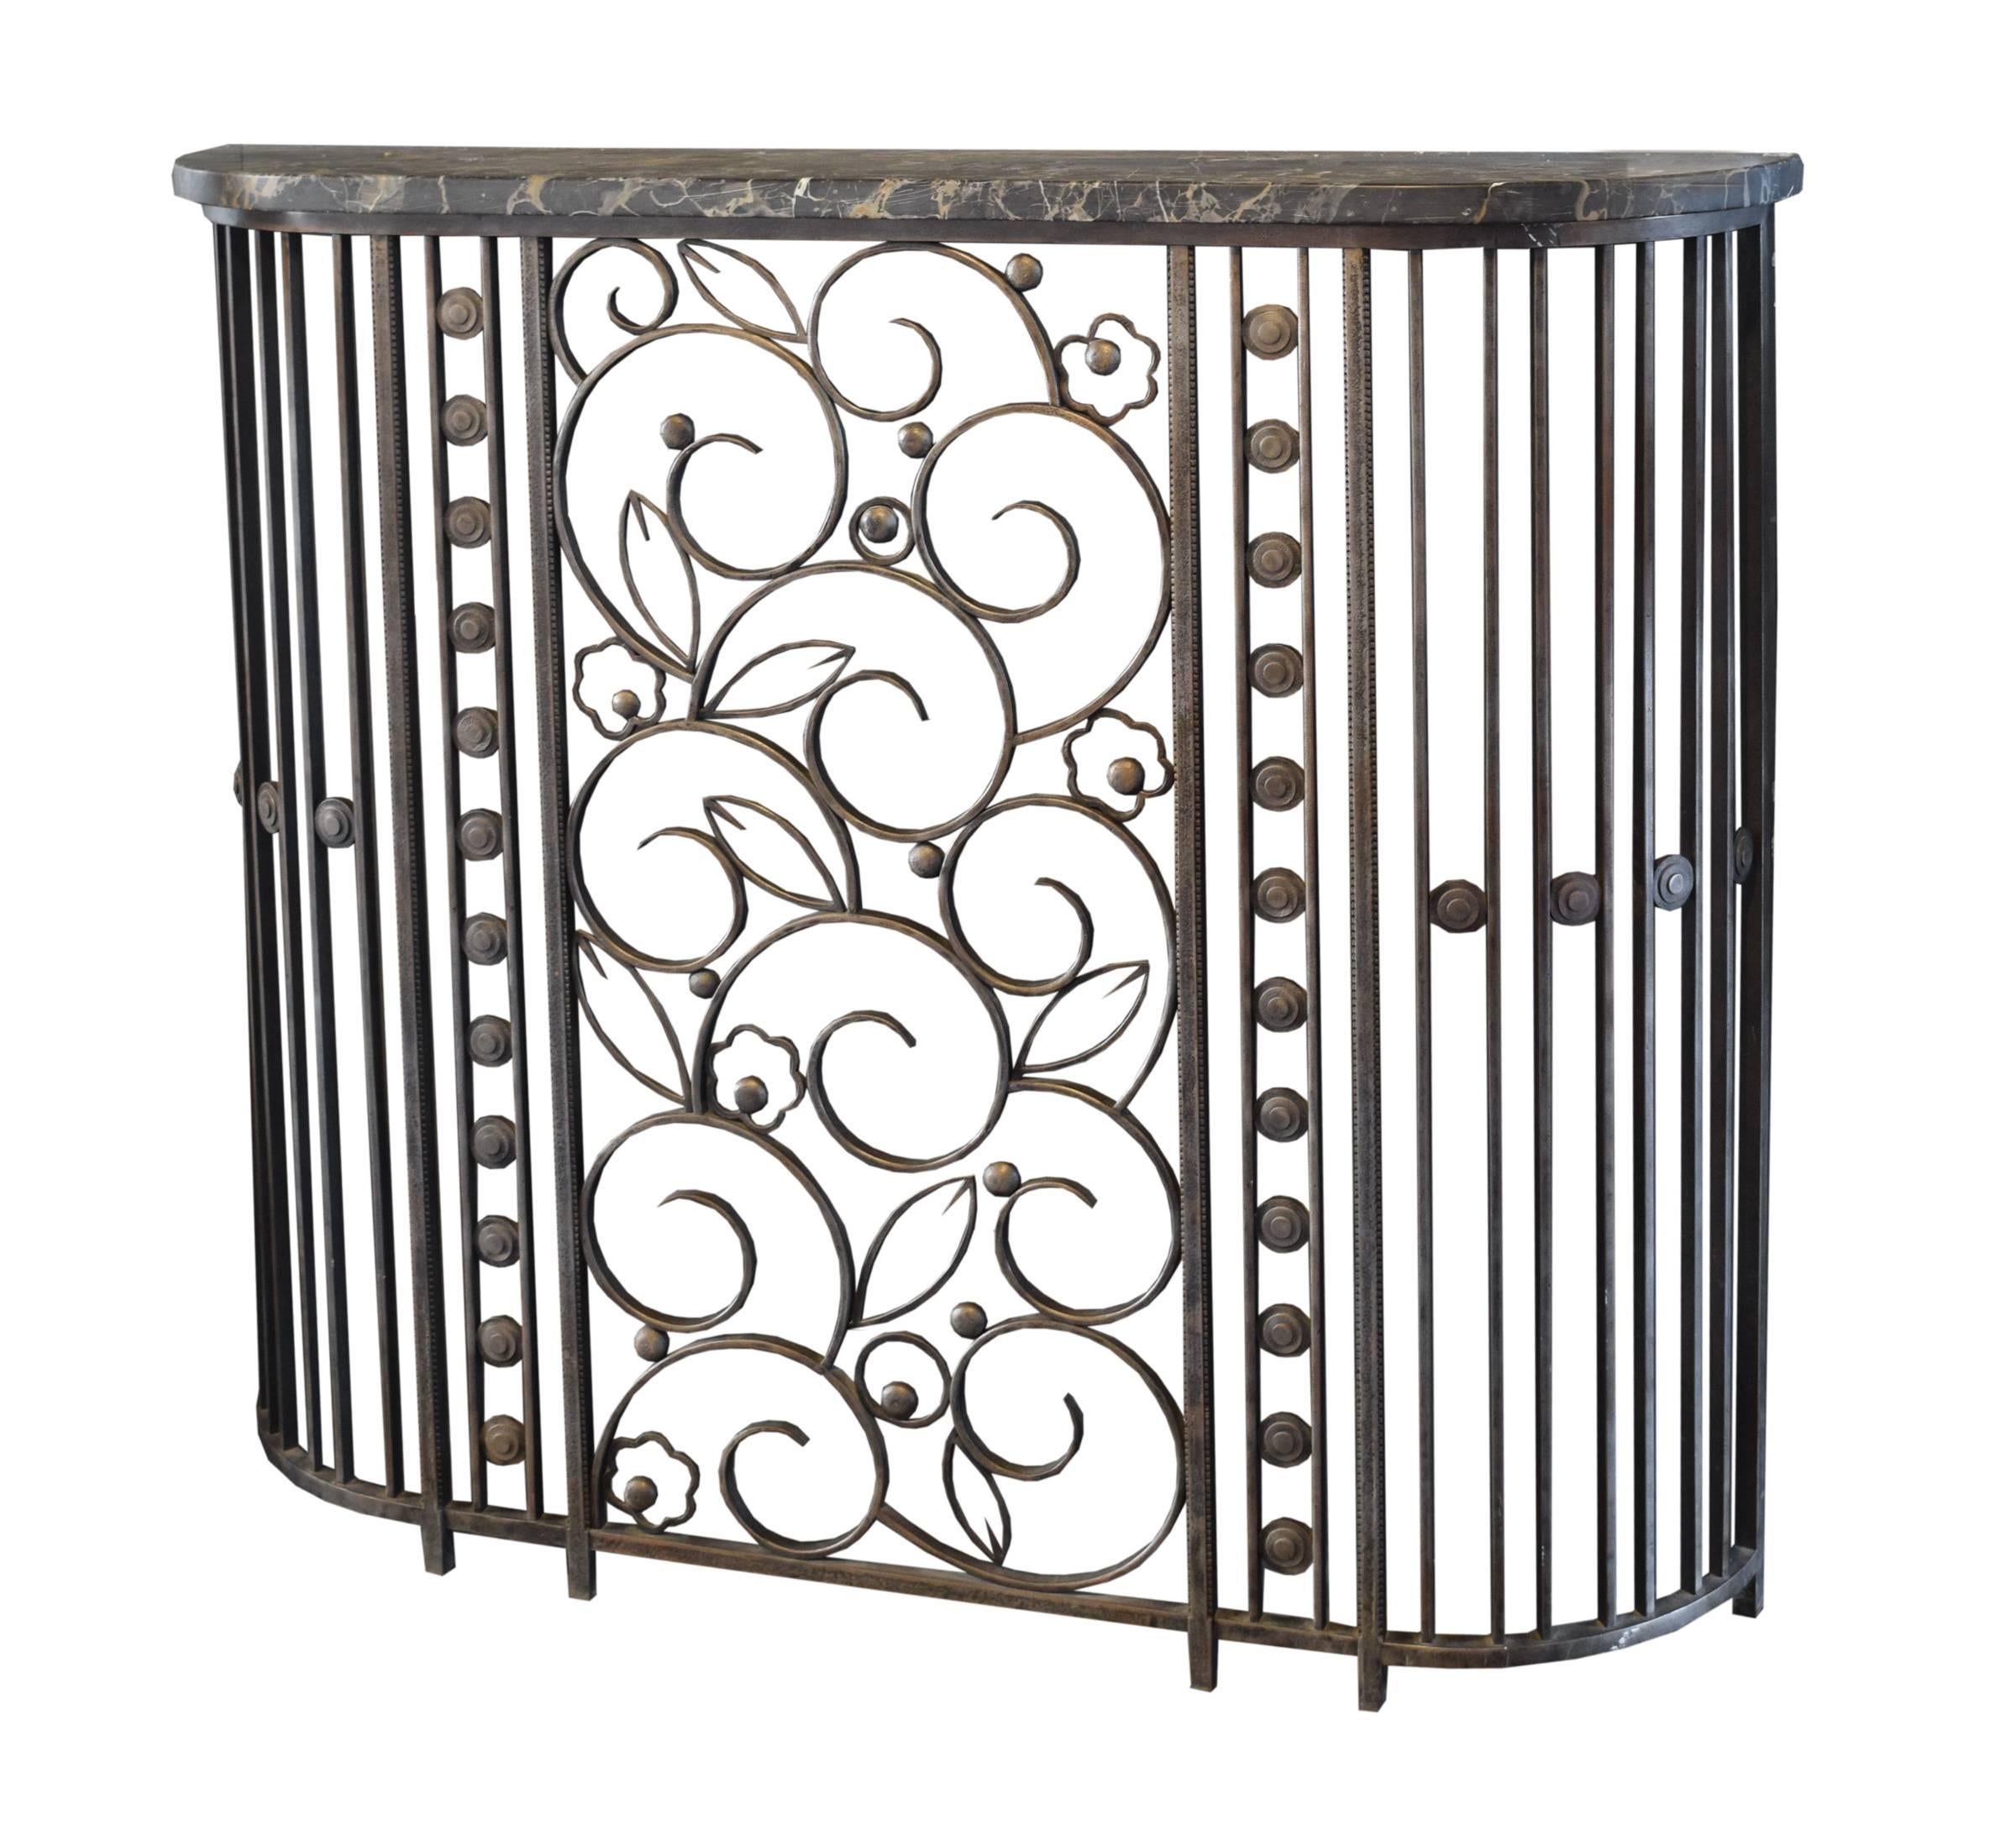 The best French fer forge wrought iron console table with a Classic Art Deco pattern and original marble top, stamped E. Brandt. By famed French artist and blacksmith Edgar Brandt, circa 1930s.